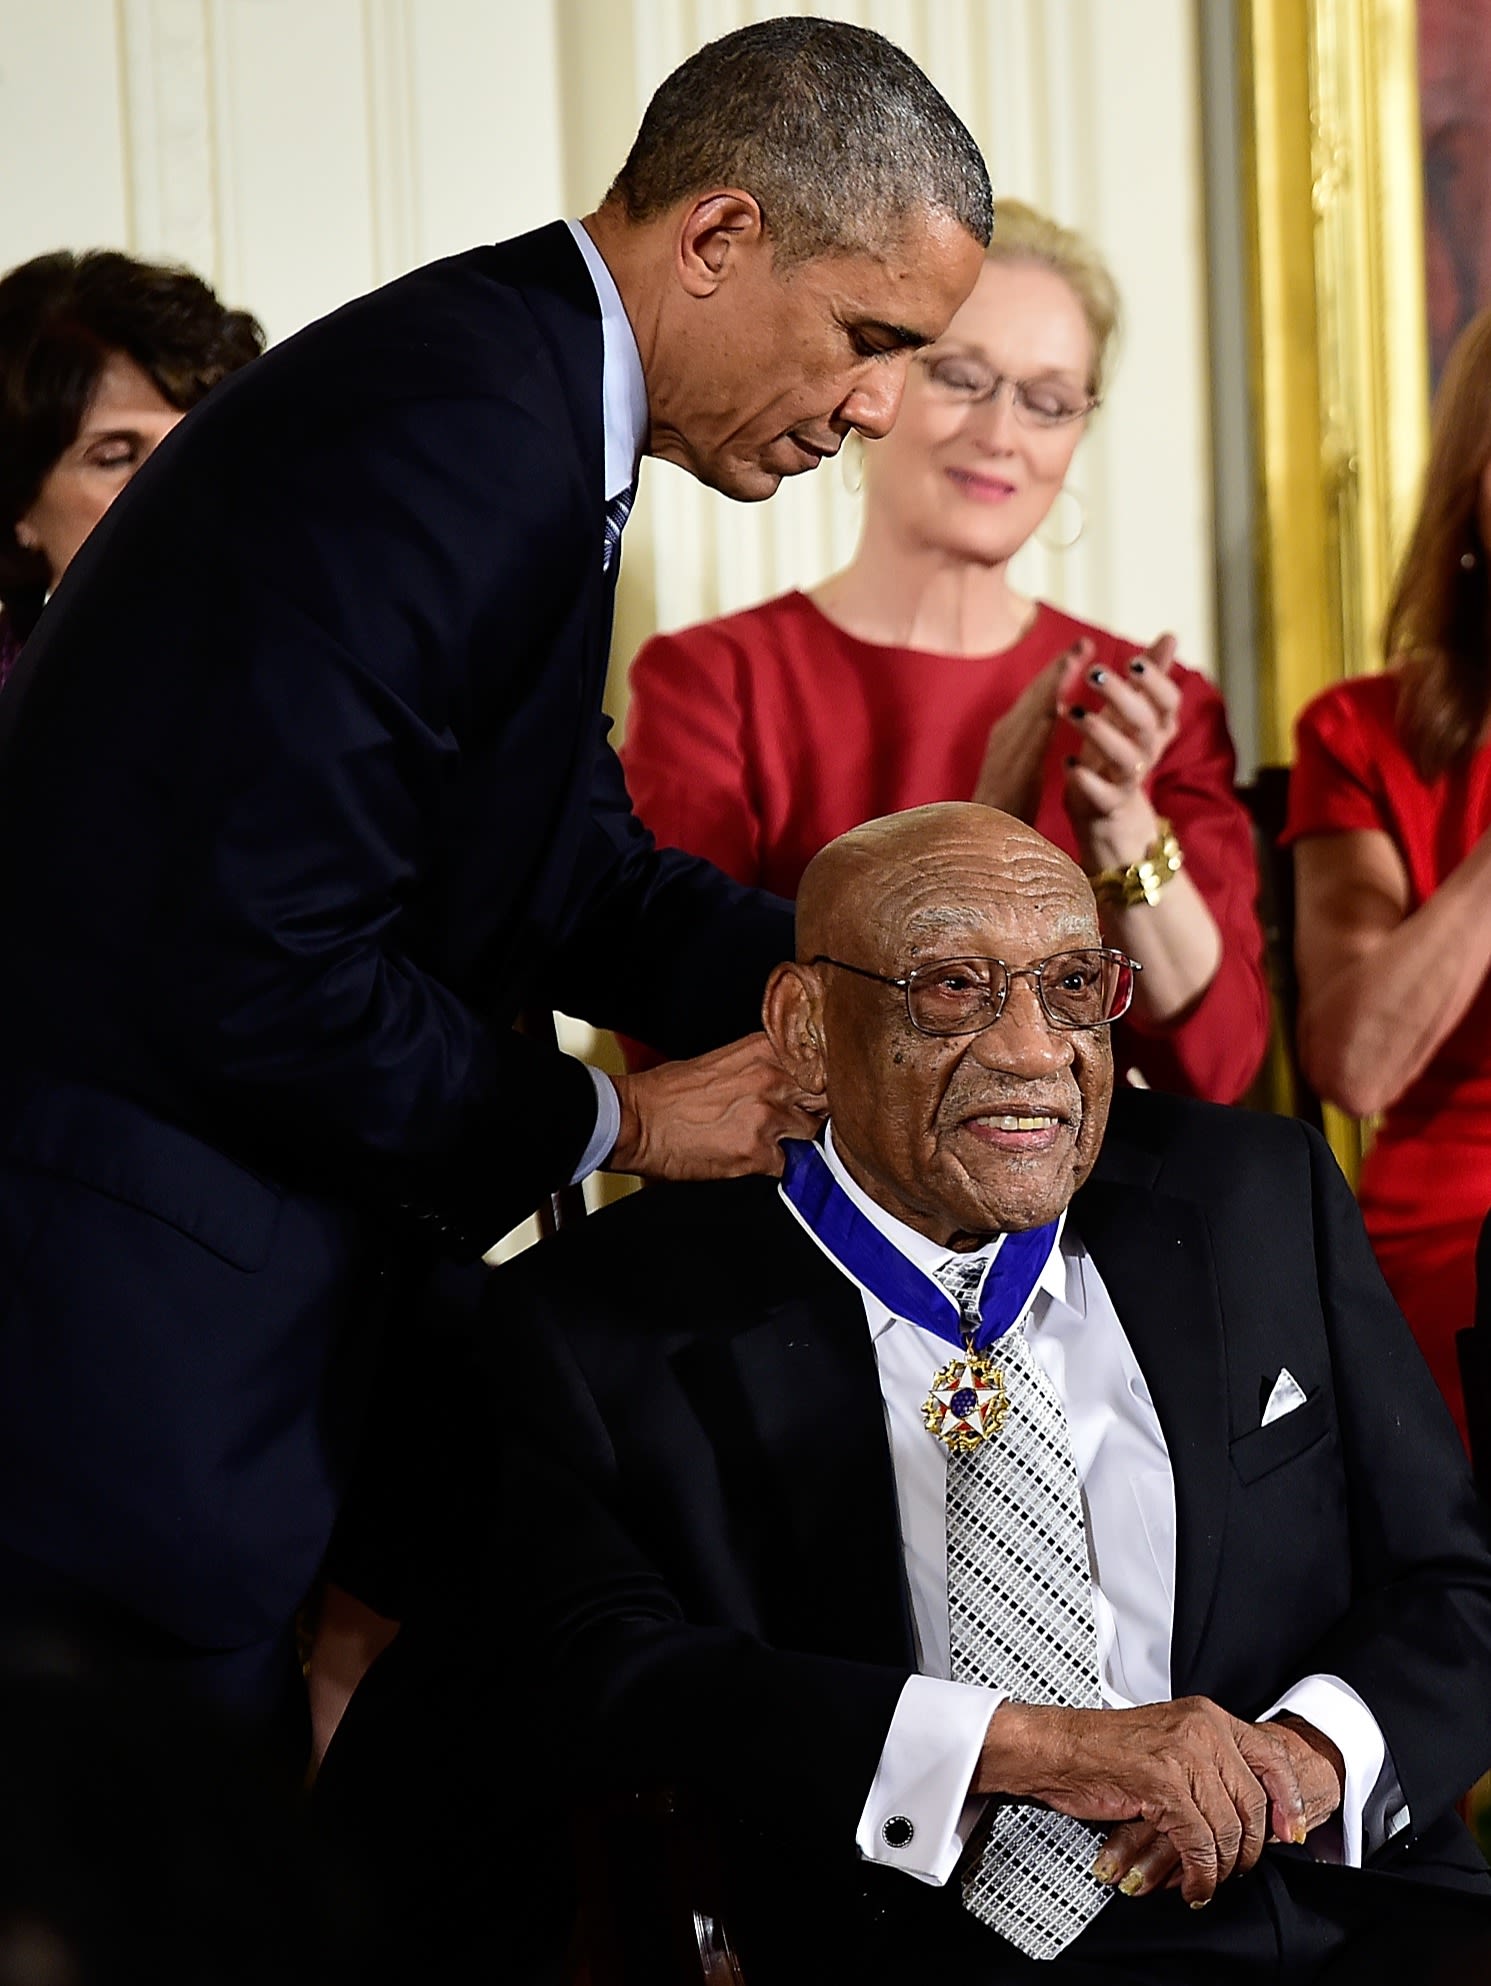 Sifford receiving the Presidential Medal of Freedom from President Obama in 2014.